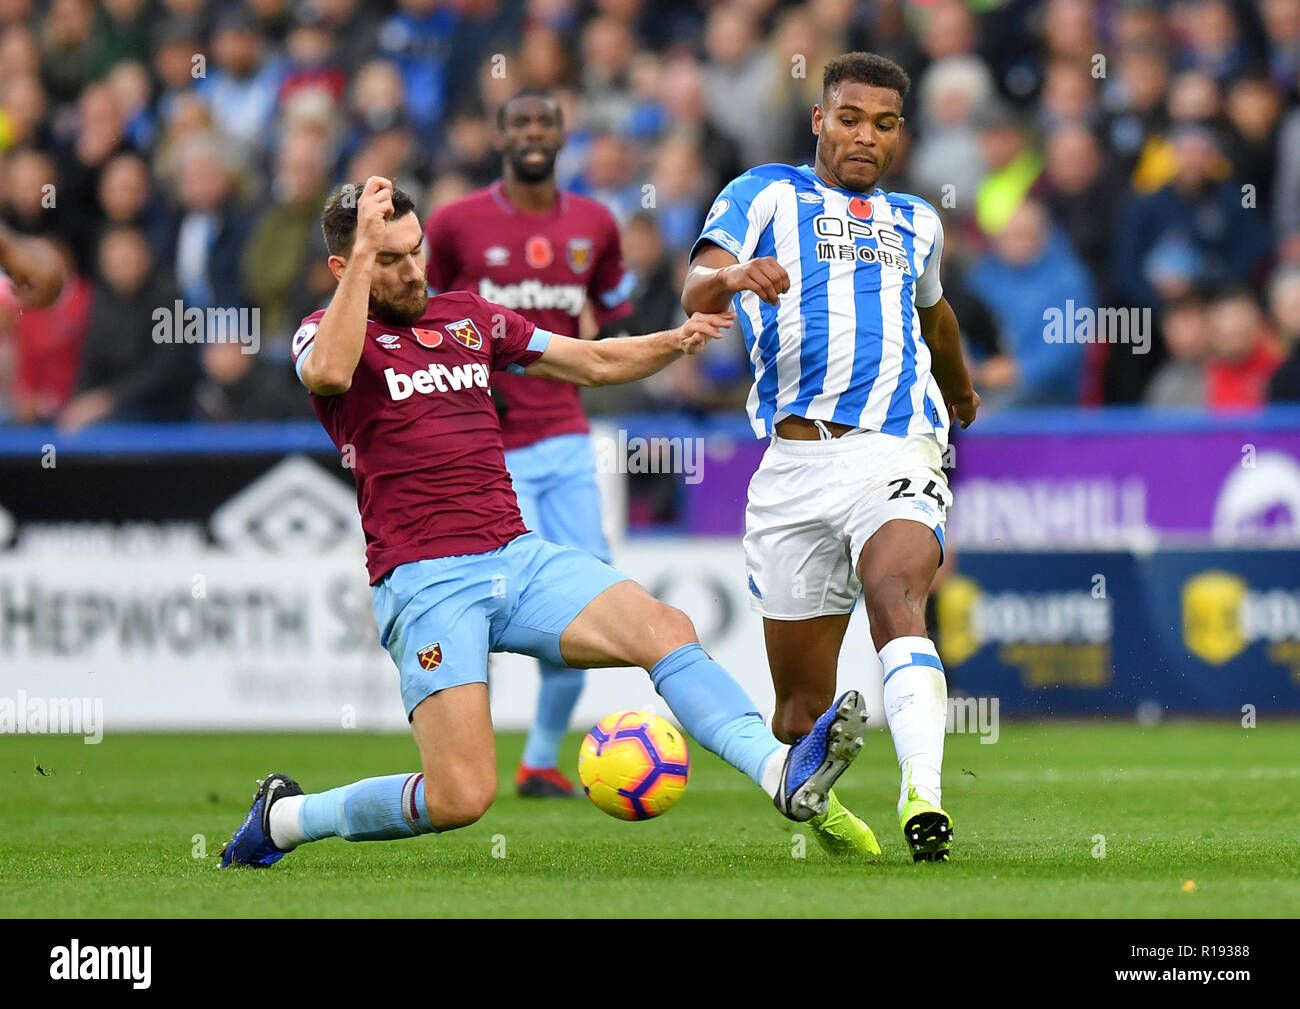 West Ham United's Robert Snodgrass (left) and Huddersfield Town's Steve Mounie battle for the ball during the Premier League match at the John Smith's Stadium, Huddersfield. Stock Photo